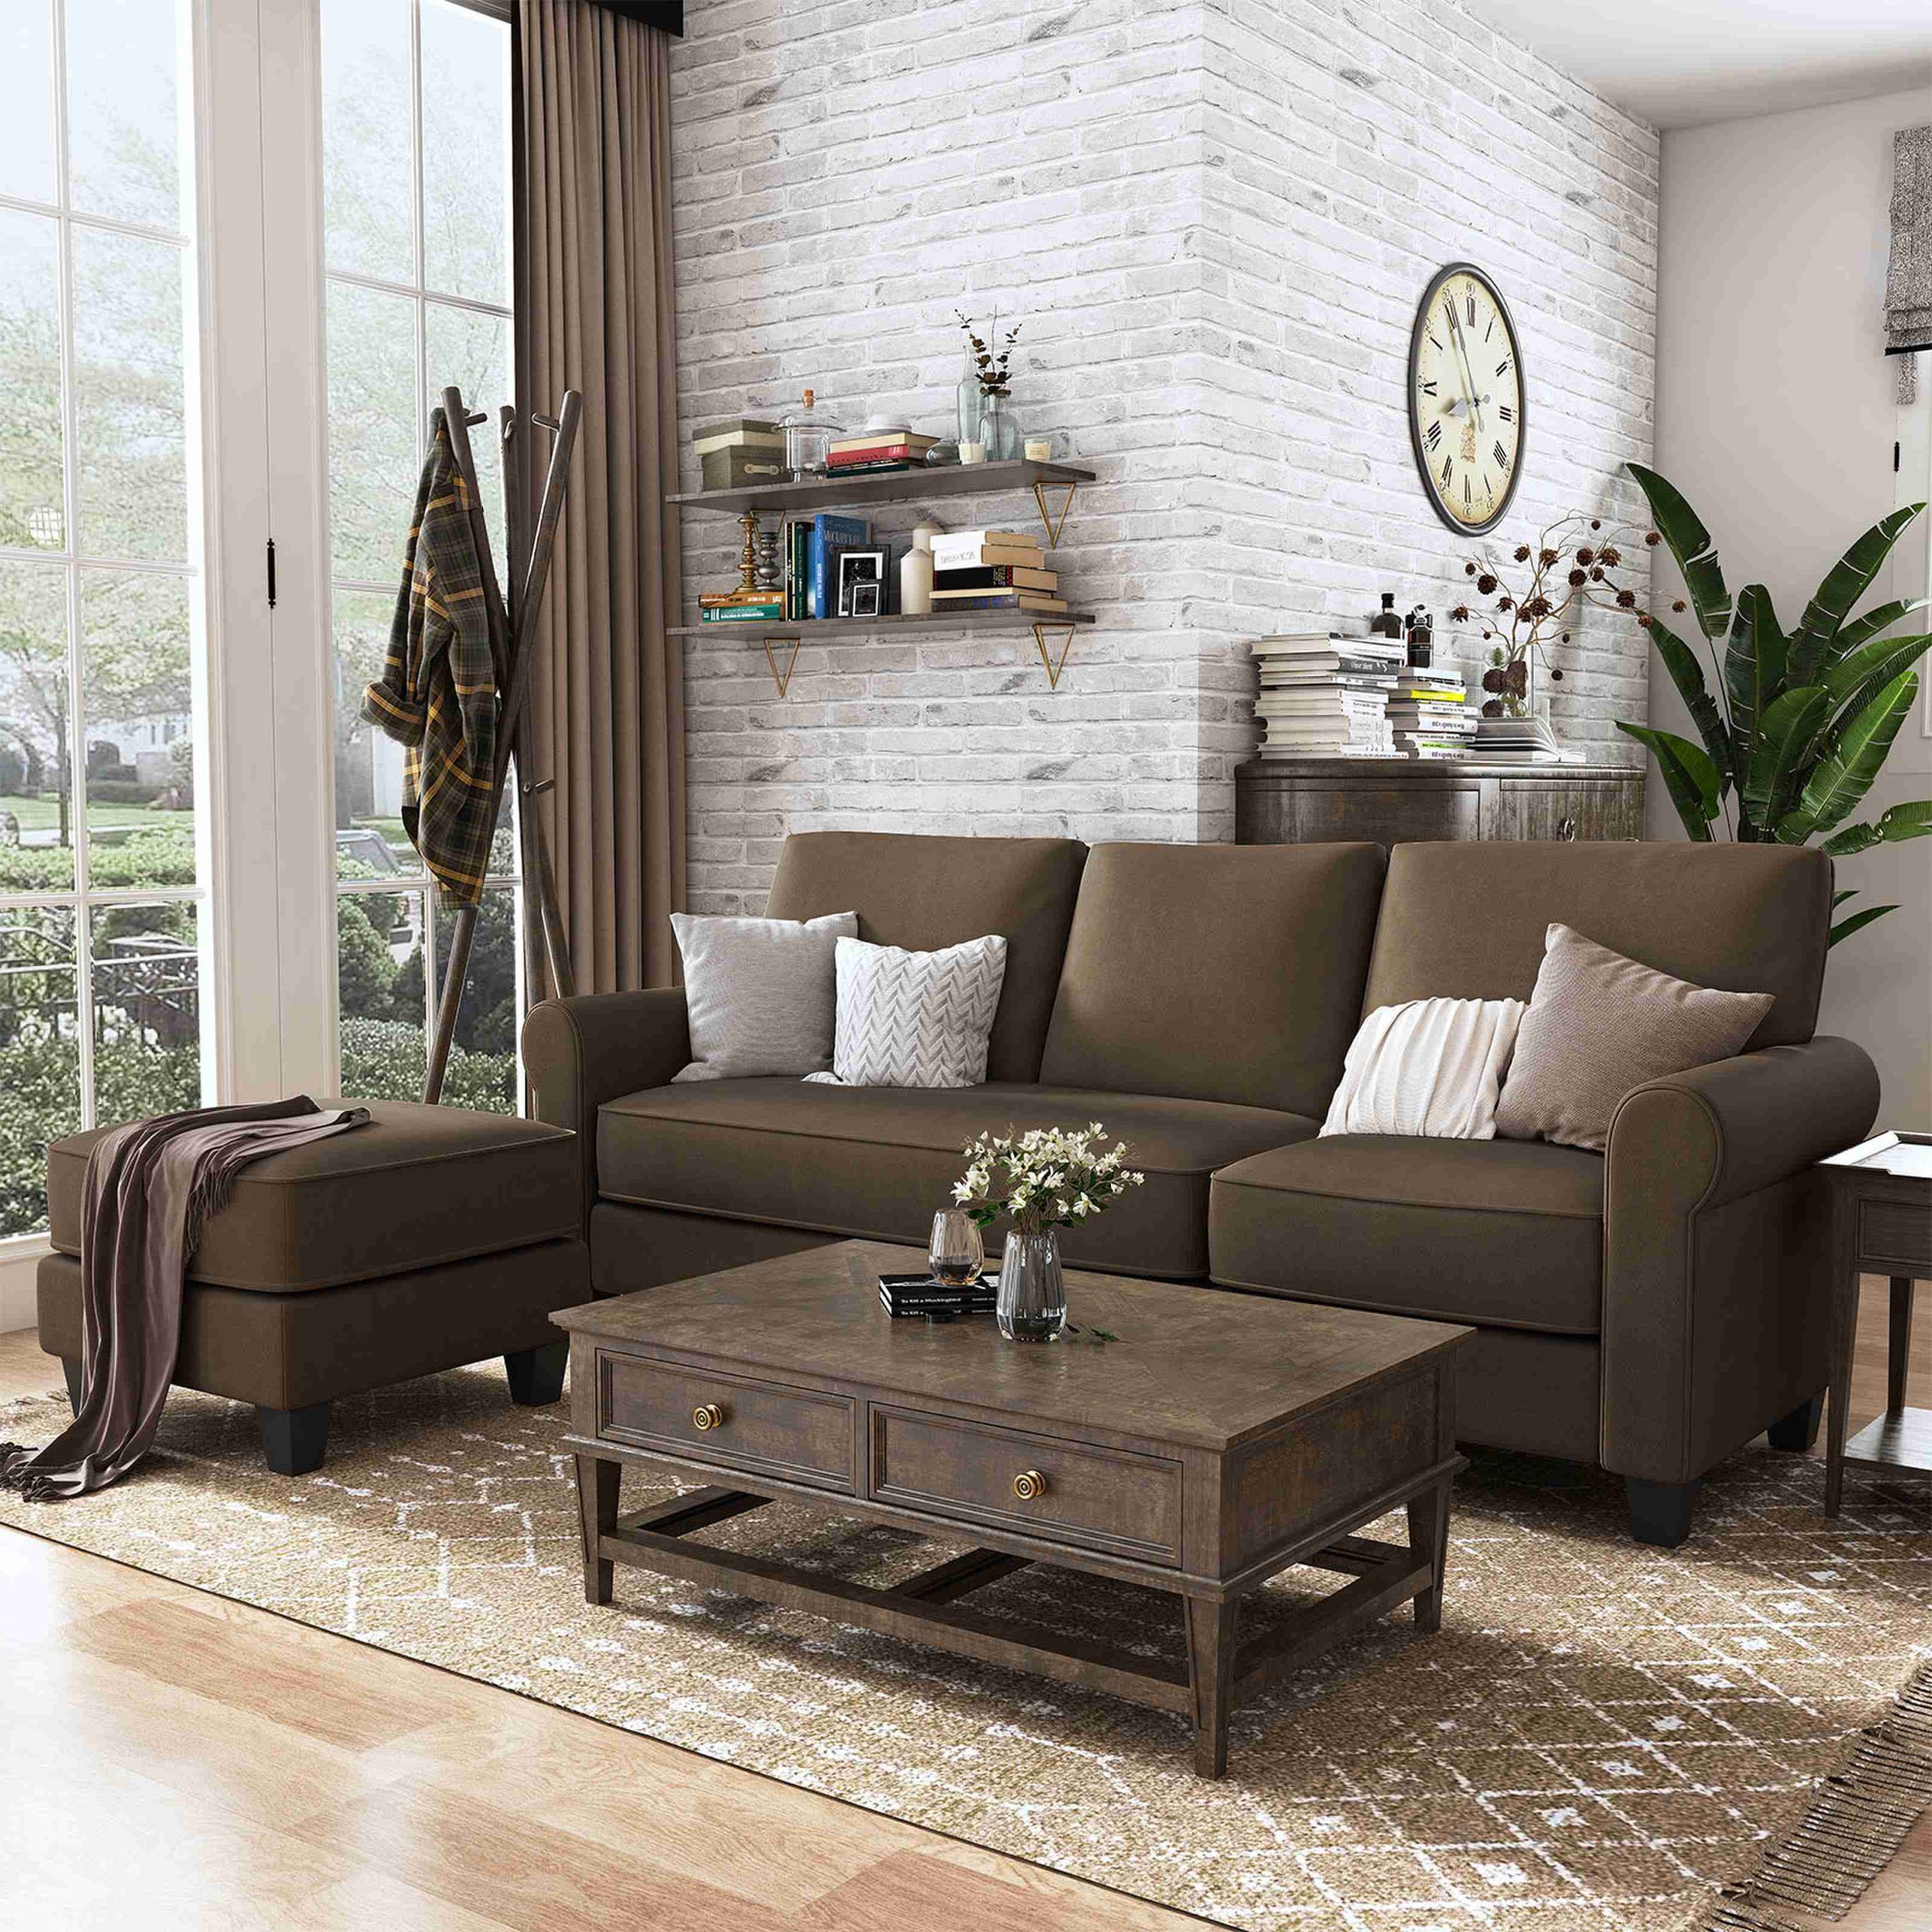 Nolany Convertible Sectional Sofa L Shaped Couch 3 Seat Sofa With Chaise, Chocolate  Brown – Walmart Pertaining To Sofas In Chocolate Brown (Photo 3 of 15)